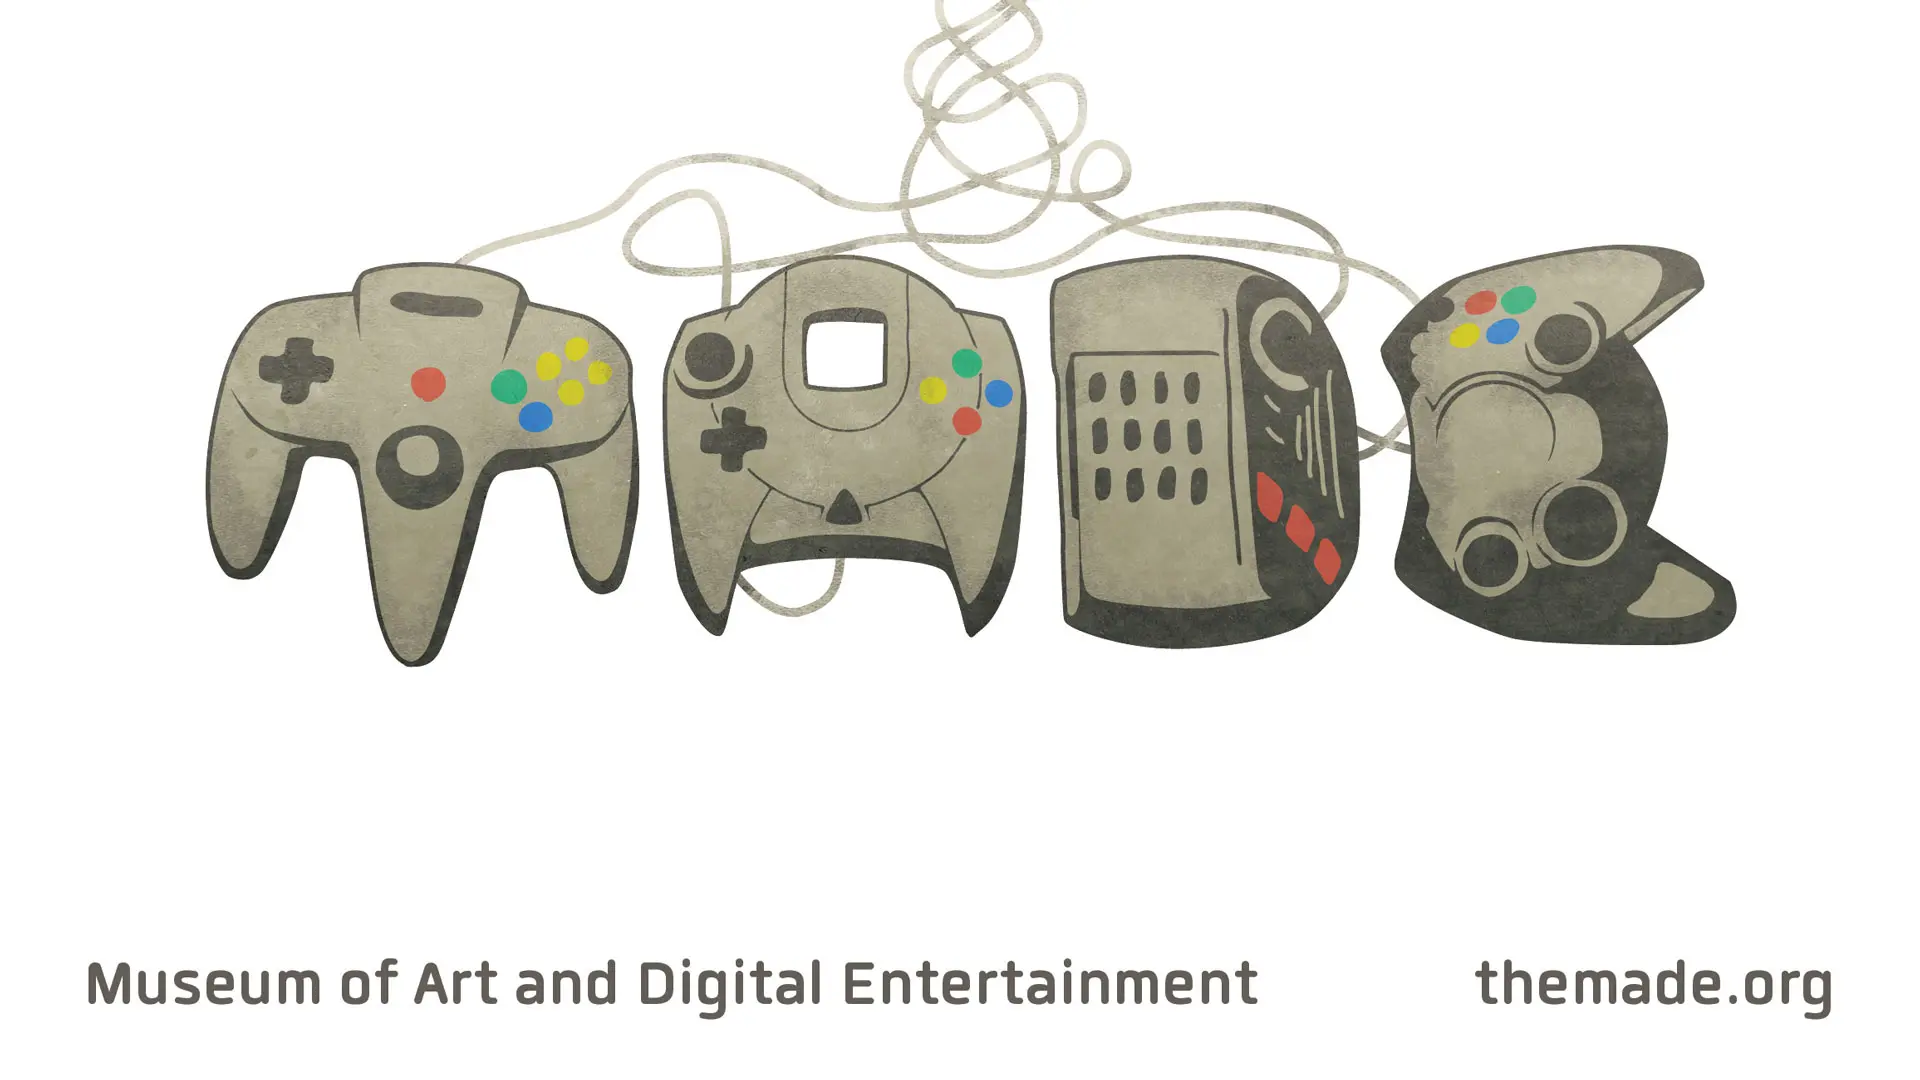 The Museum of Art and Digital Entertainment